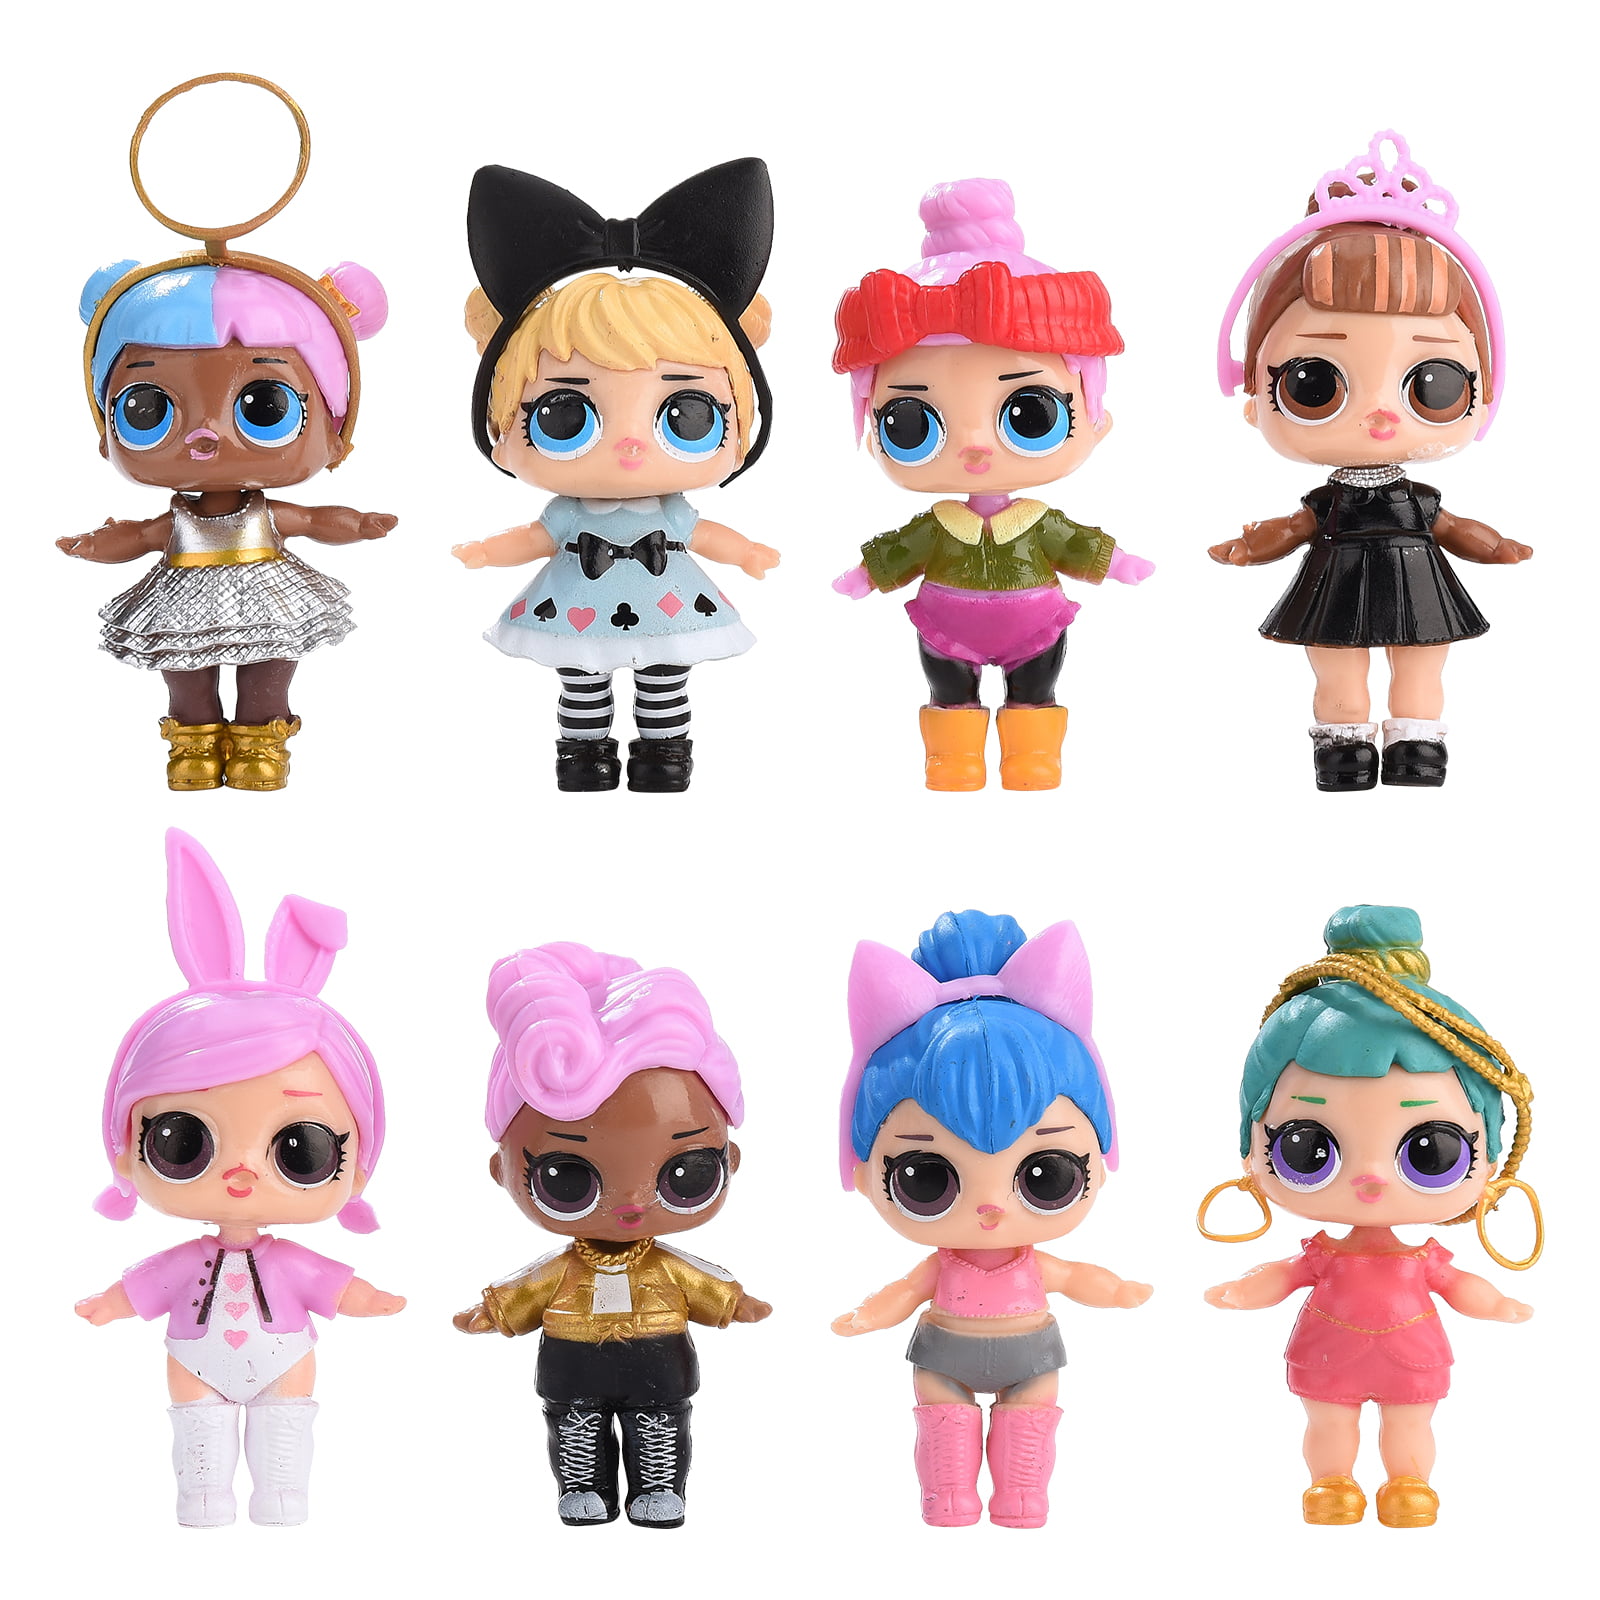 Dolls Toy Set Decoration for Birthday Party Surprise.d Dolls Figures 3” 8PCS Dolls Cake Toppers 